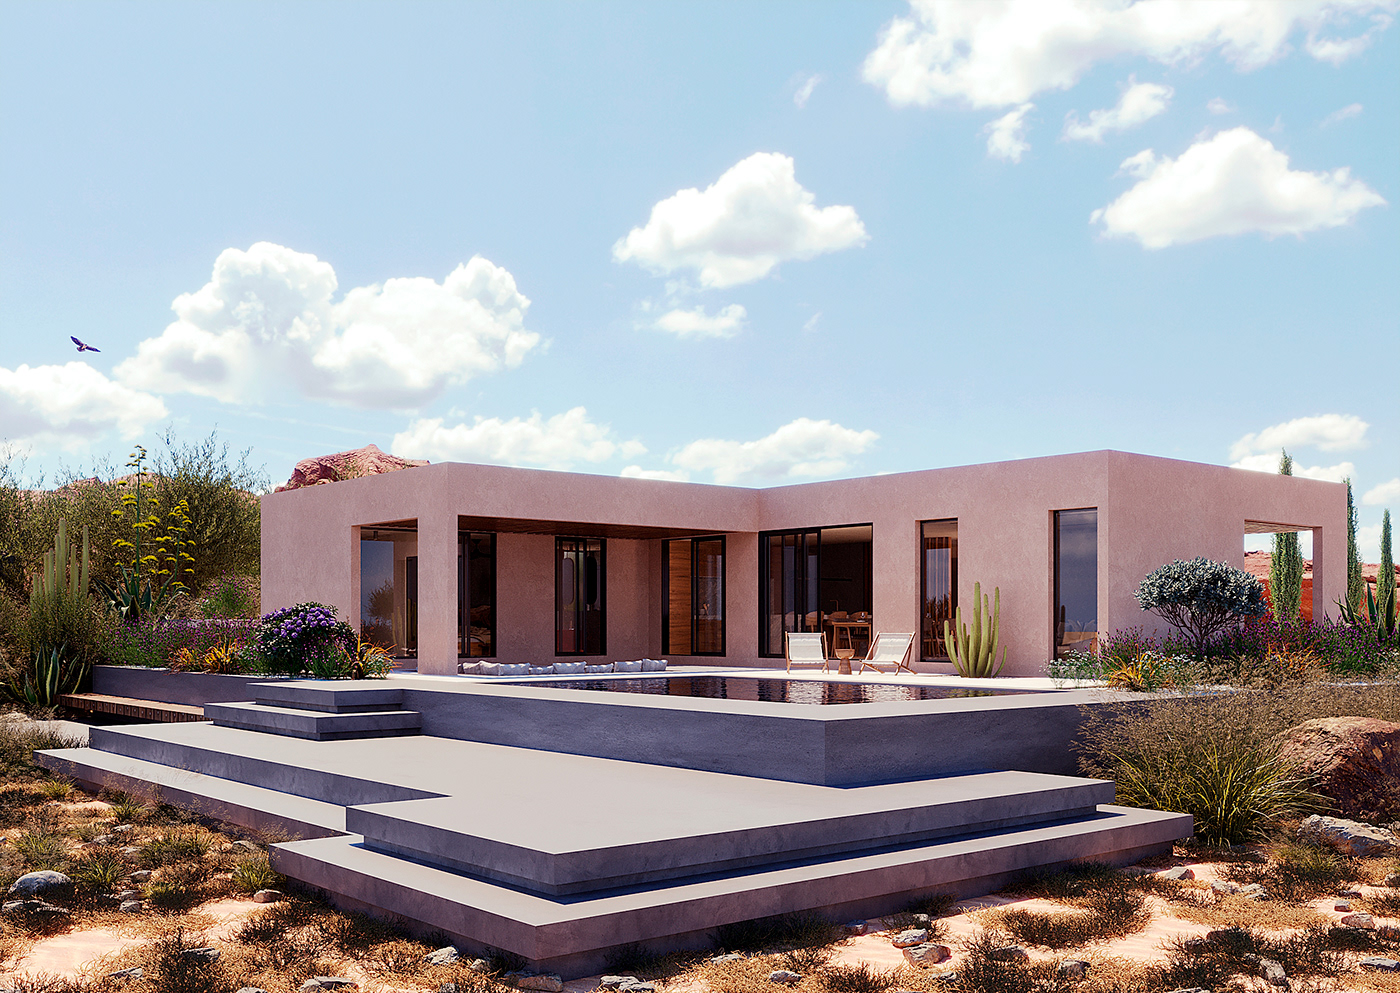 Exterior view of a minimalist house in the middle of the desert